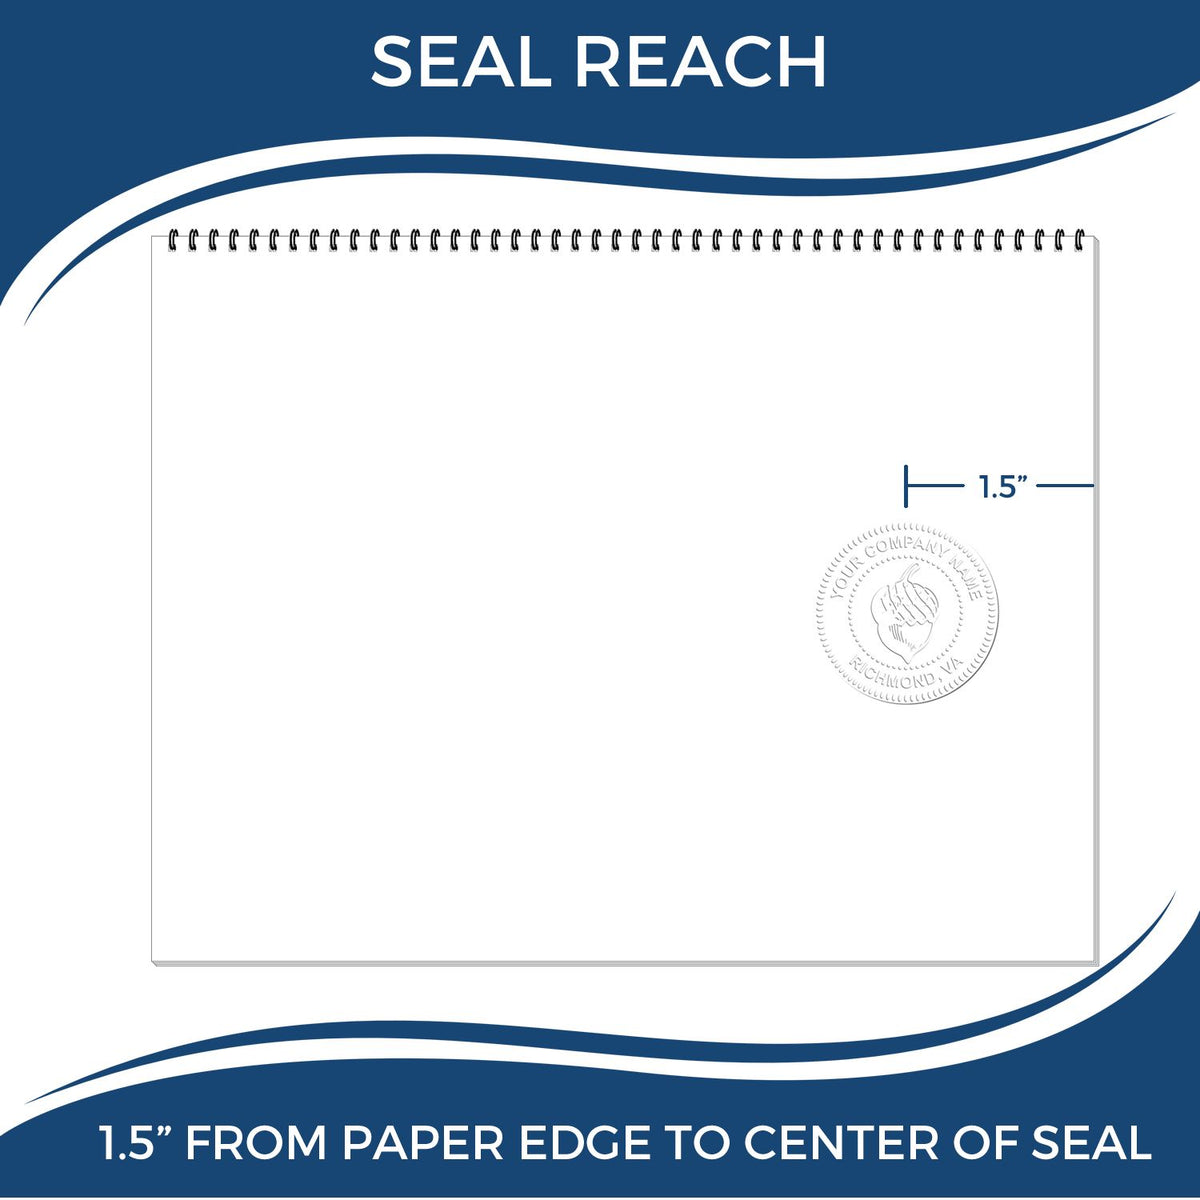 An infographic showing the seal reach which is represented by a ruler and a miniature seal image of the State of Illinois Architectural Seal Embosser